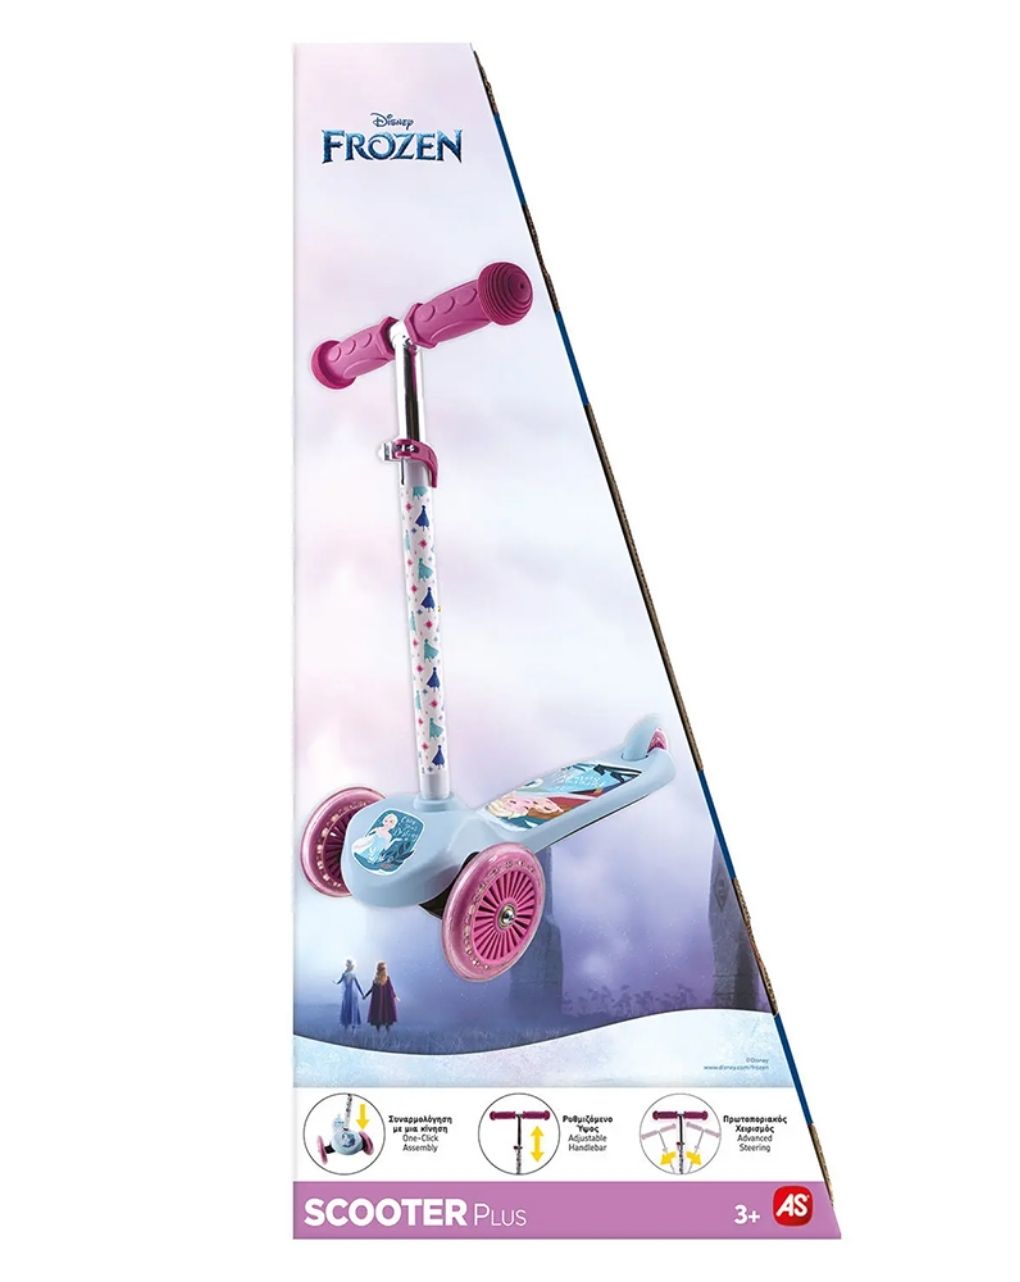 Scooter plus frozen 5004-50265 - AS Company